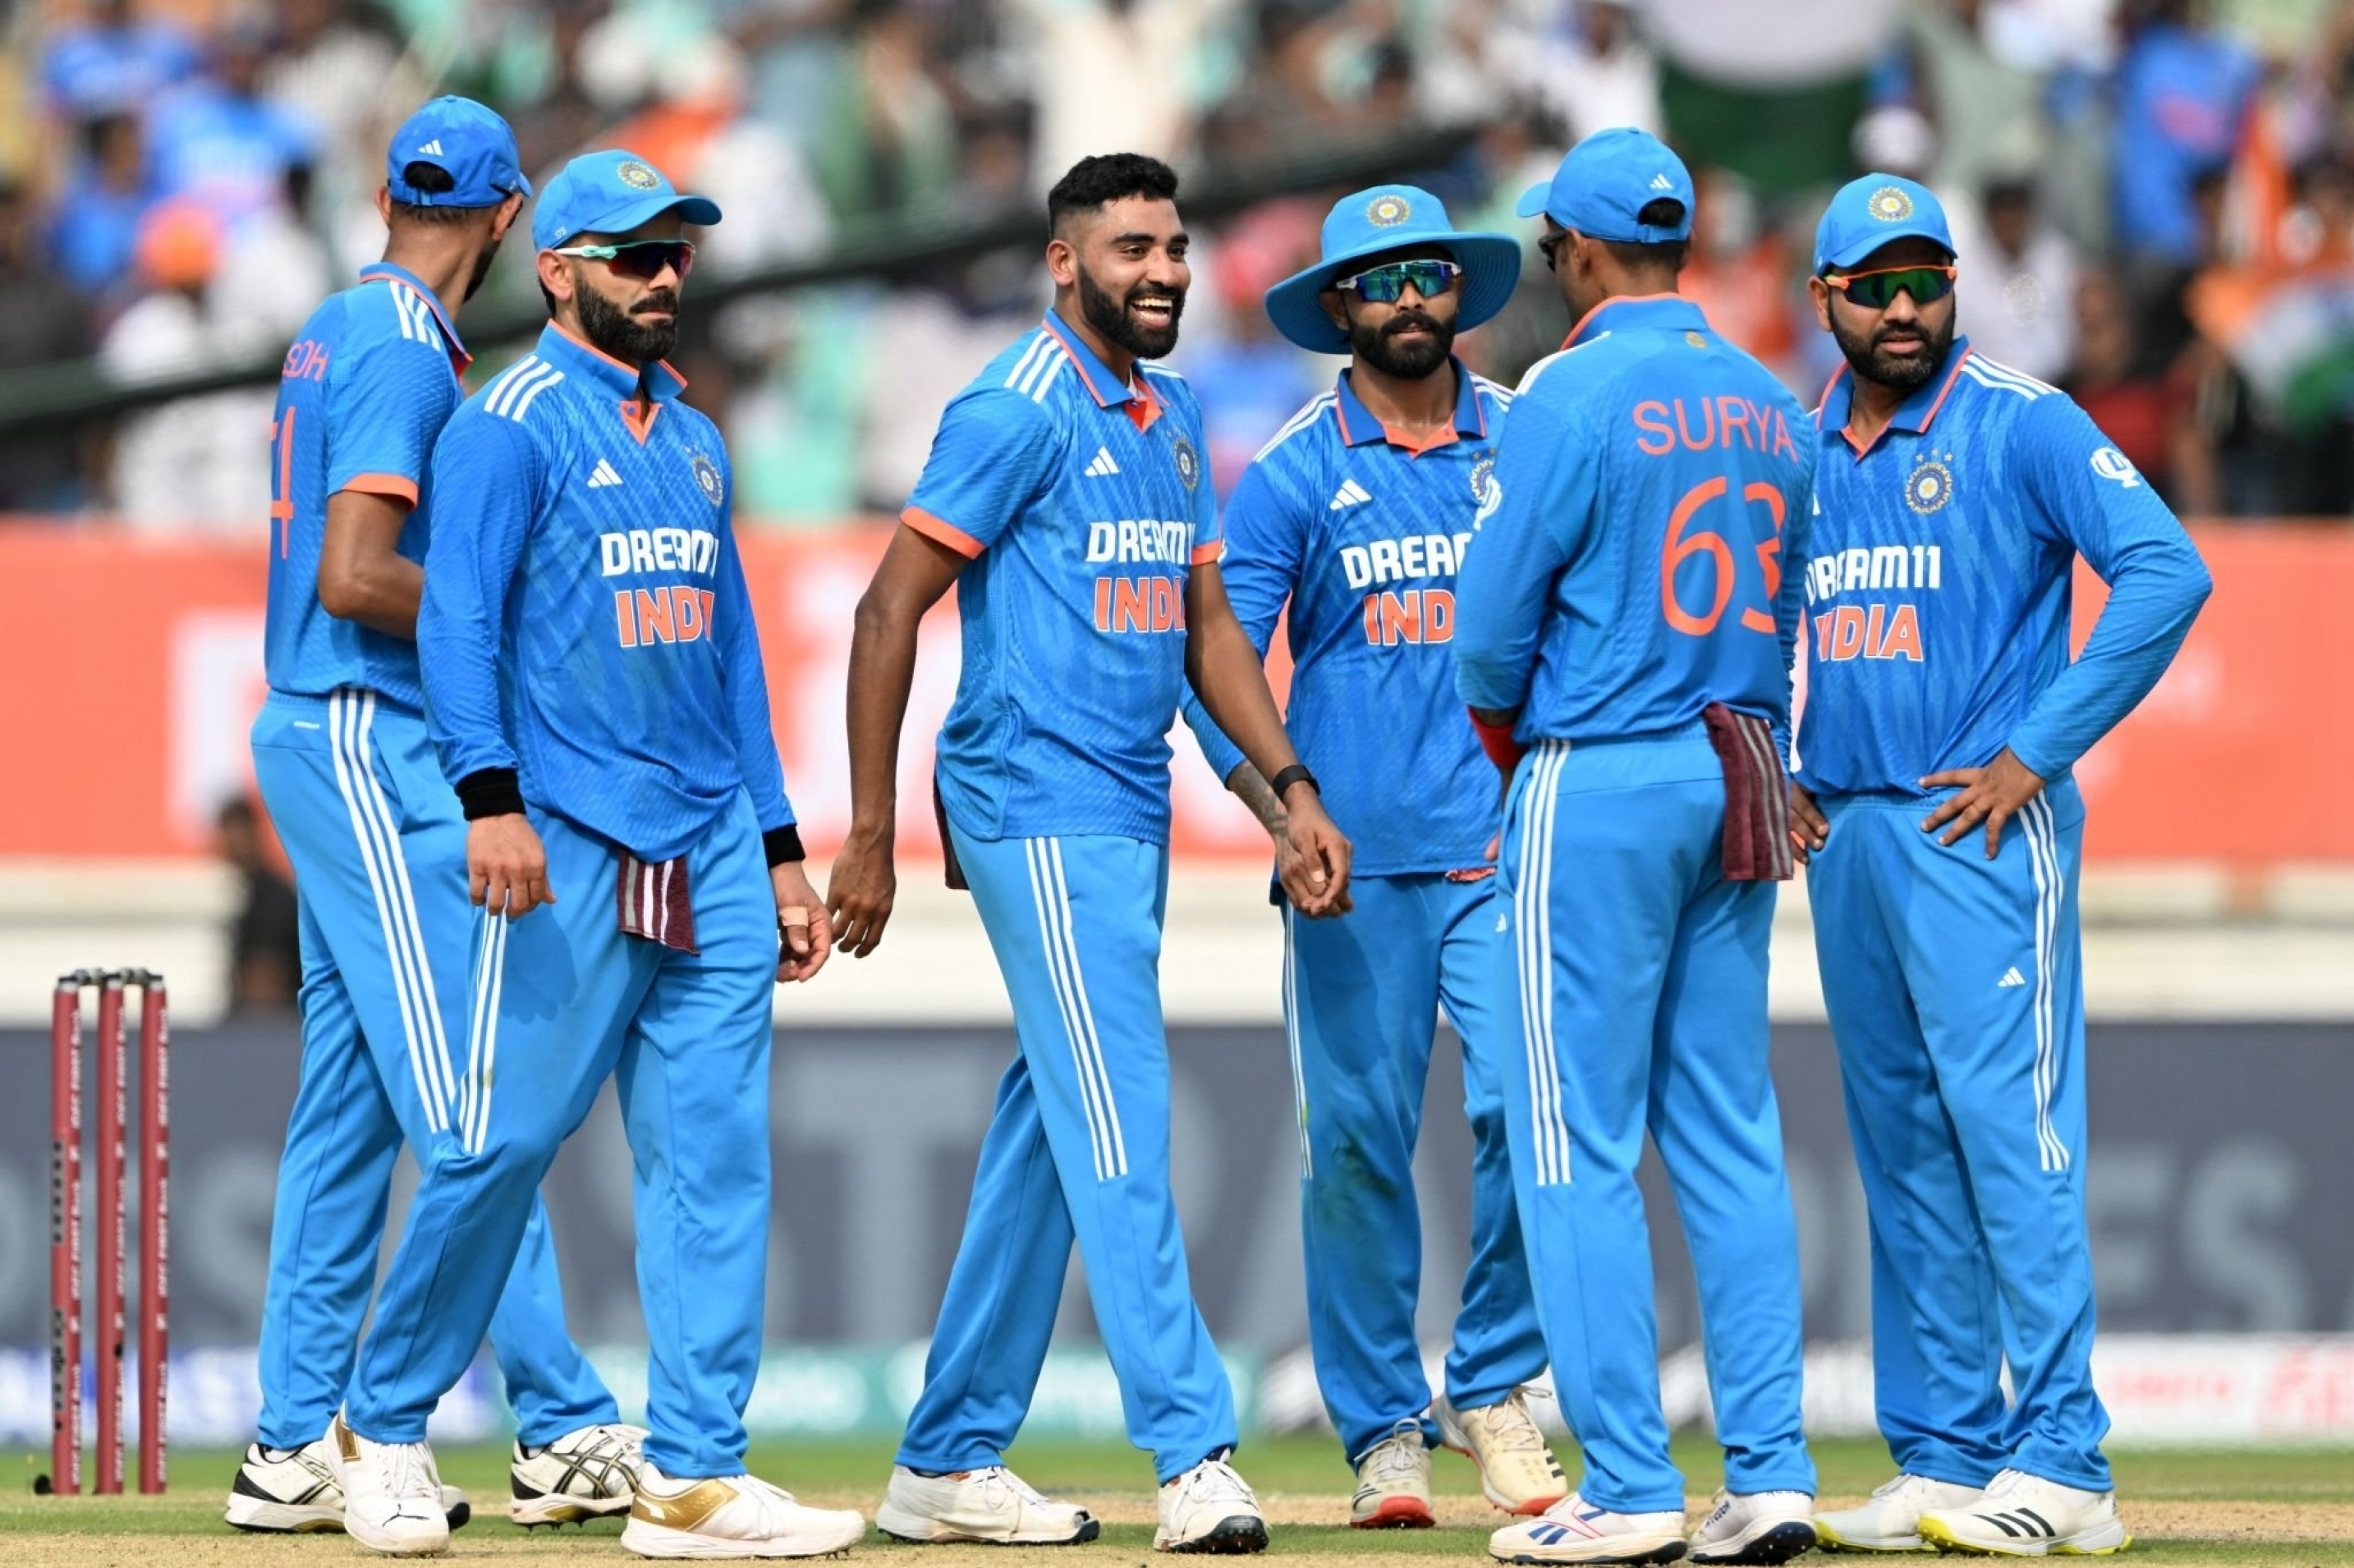 ODI World Cup warm-up live streaming When and Where to watch